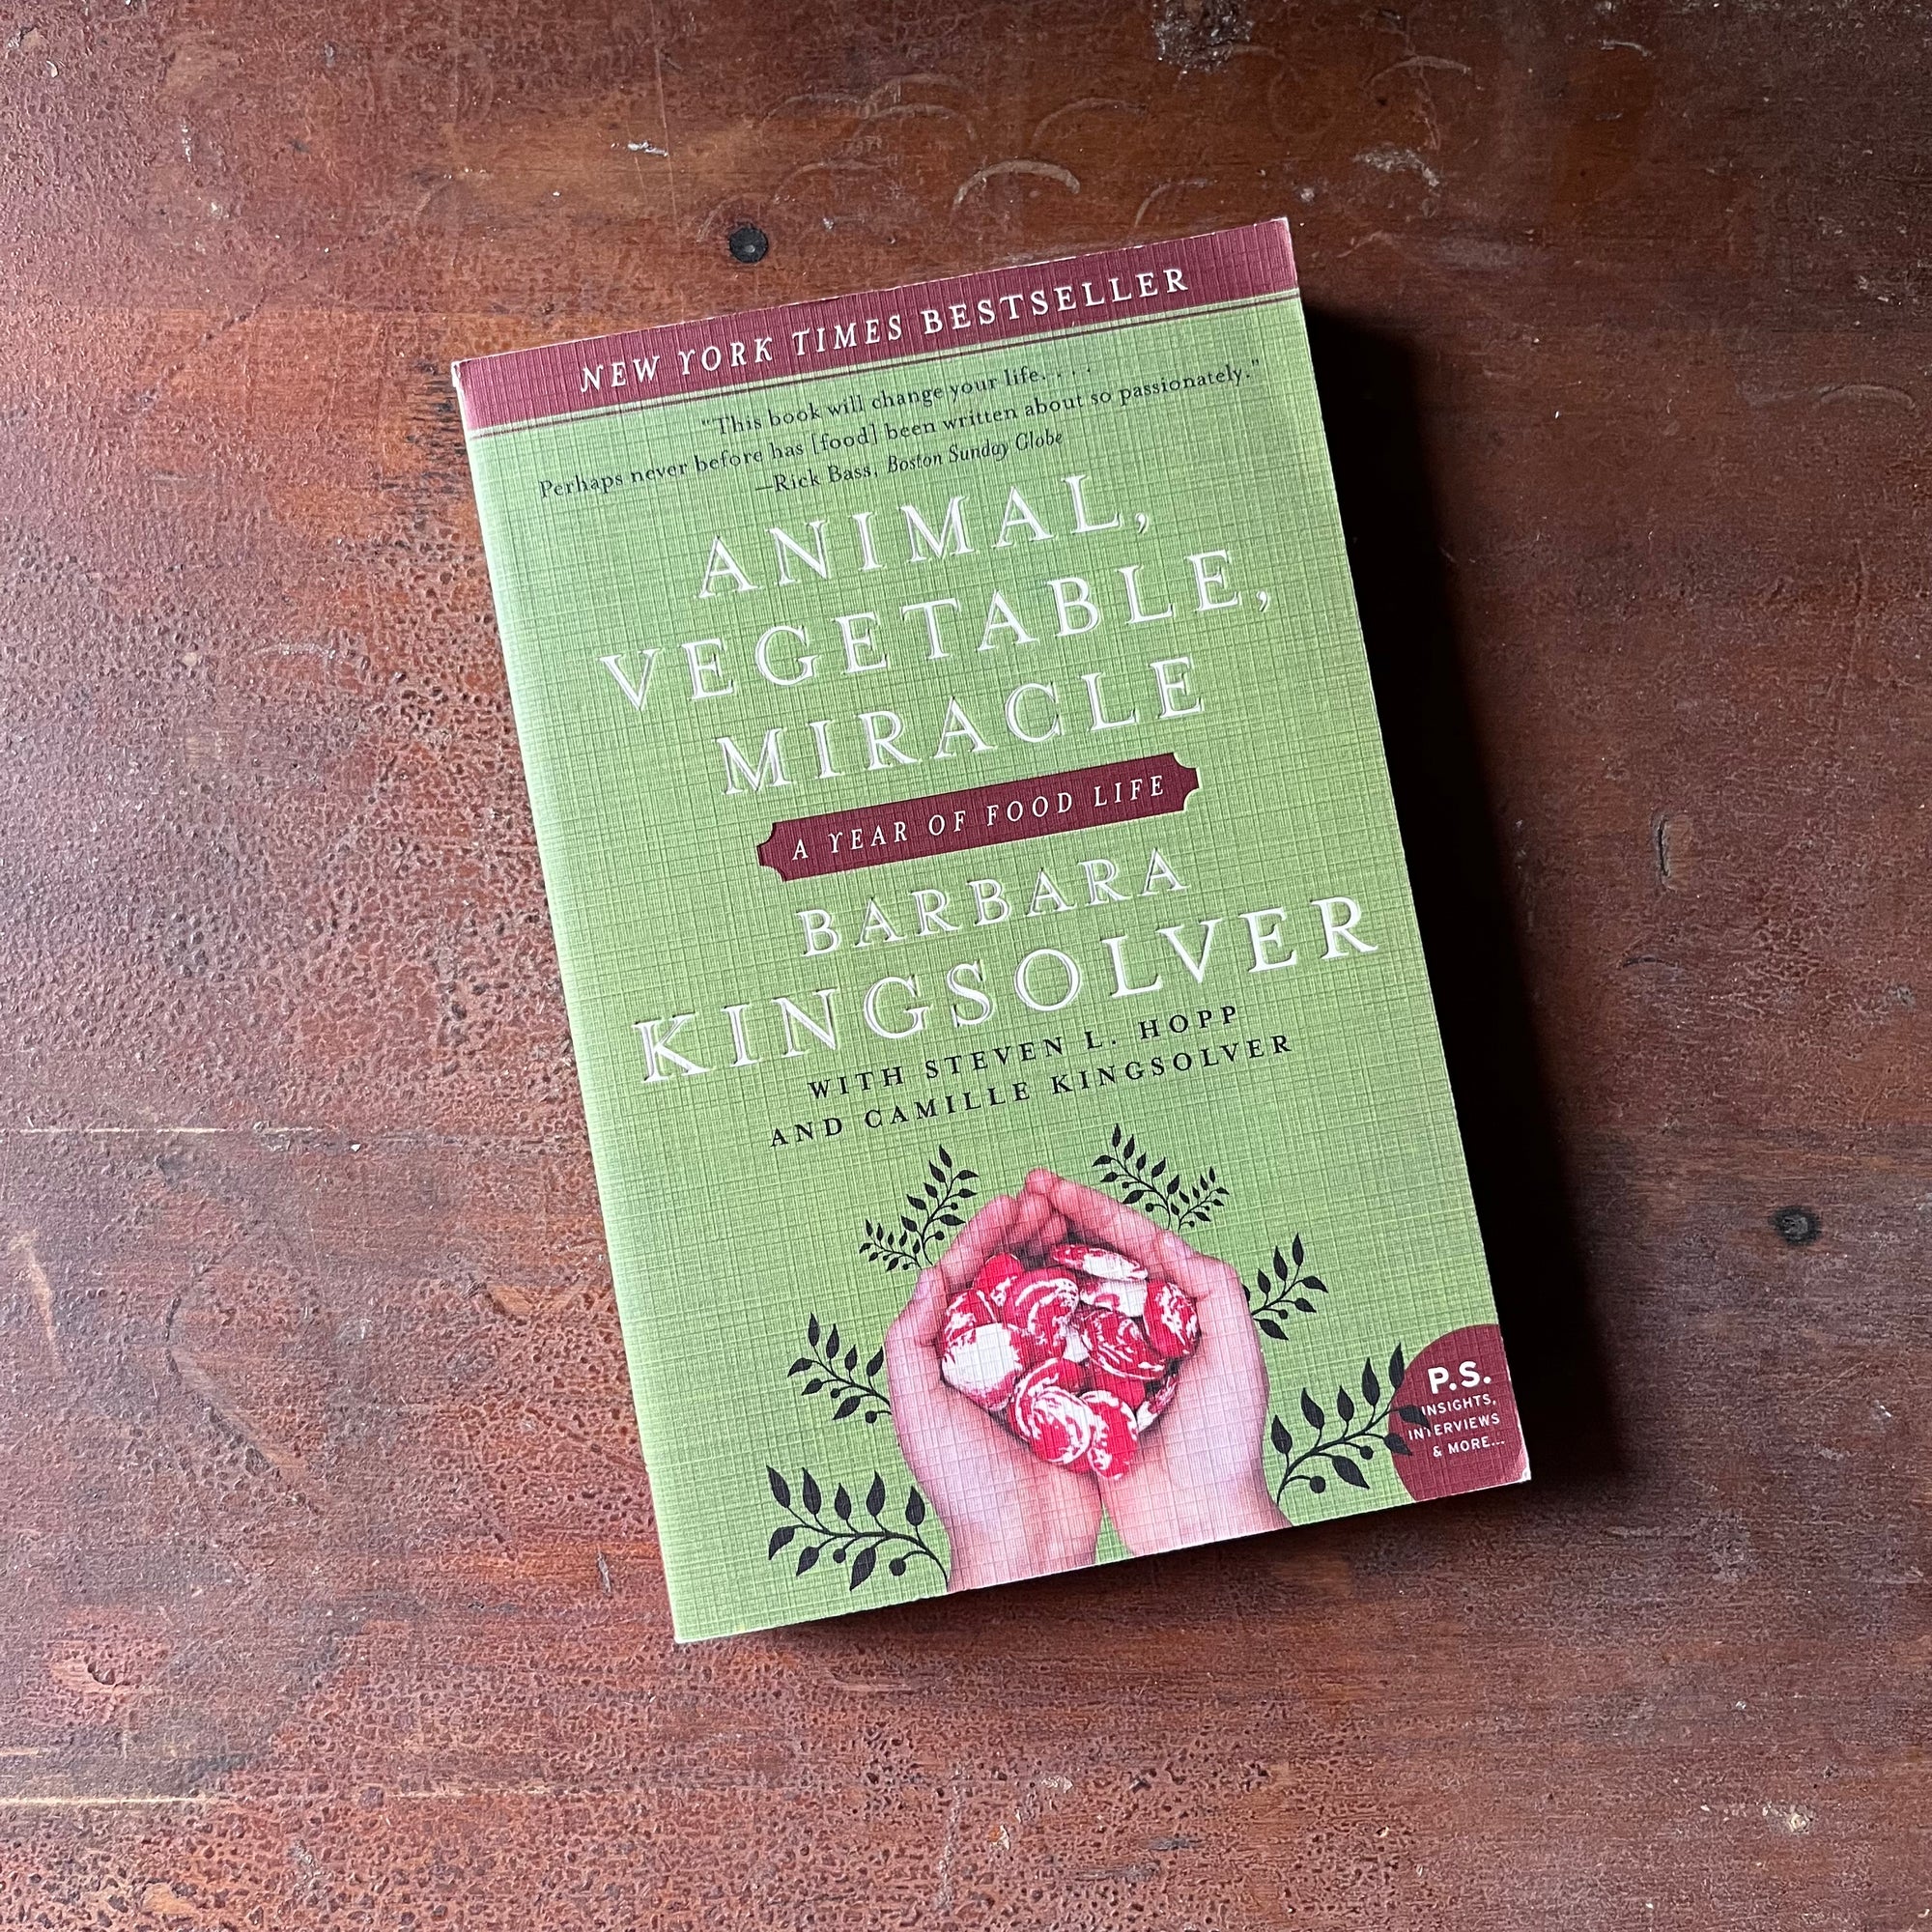 Animal, Vegetable, Miracle A year of Food Life by Barbara Kingsolver - view of the front cover